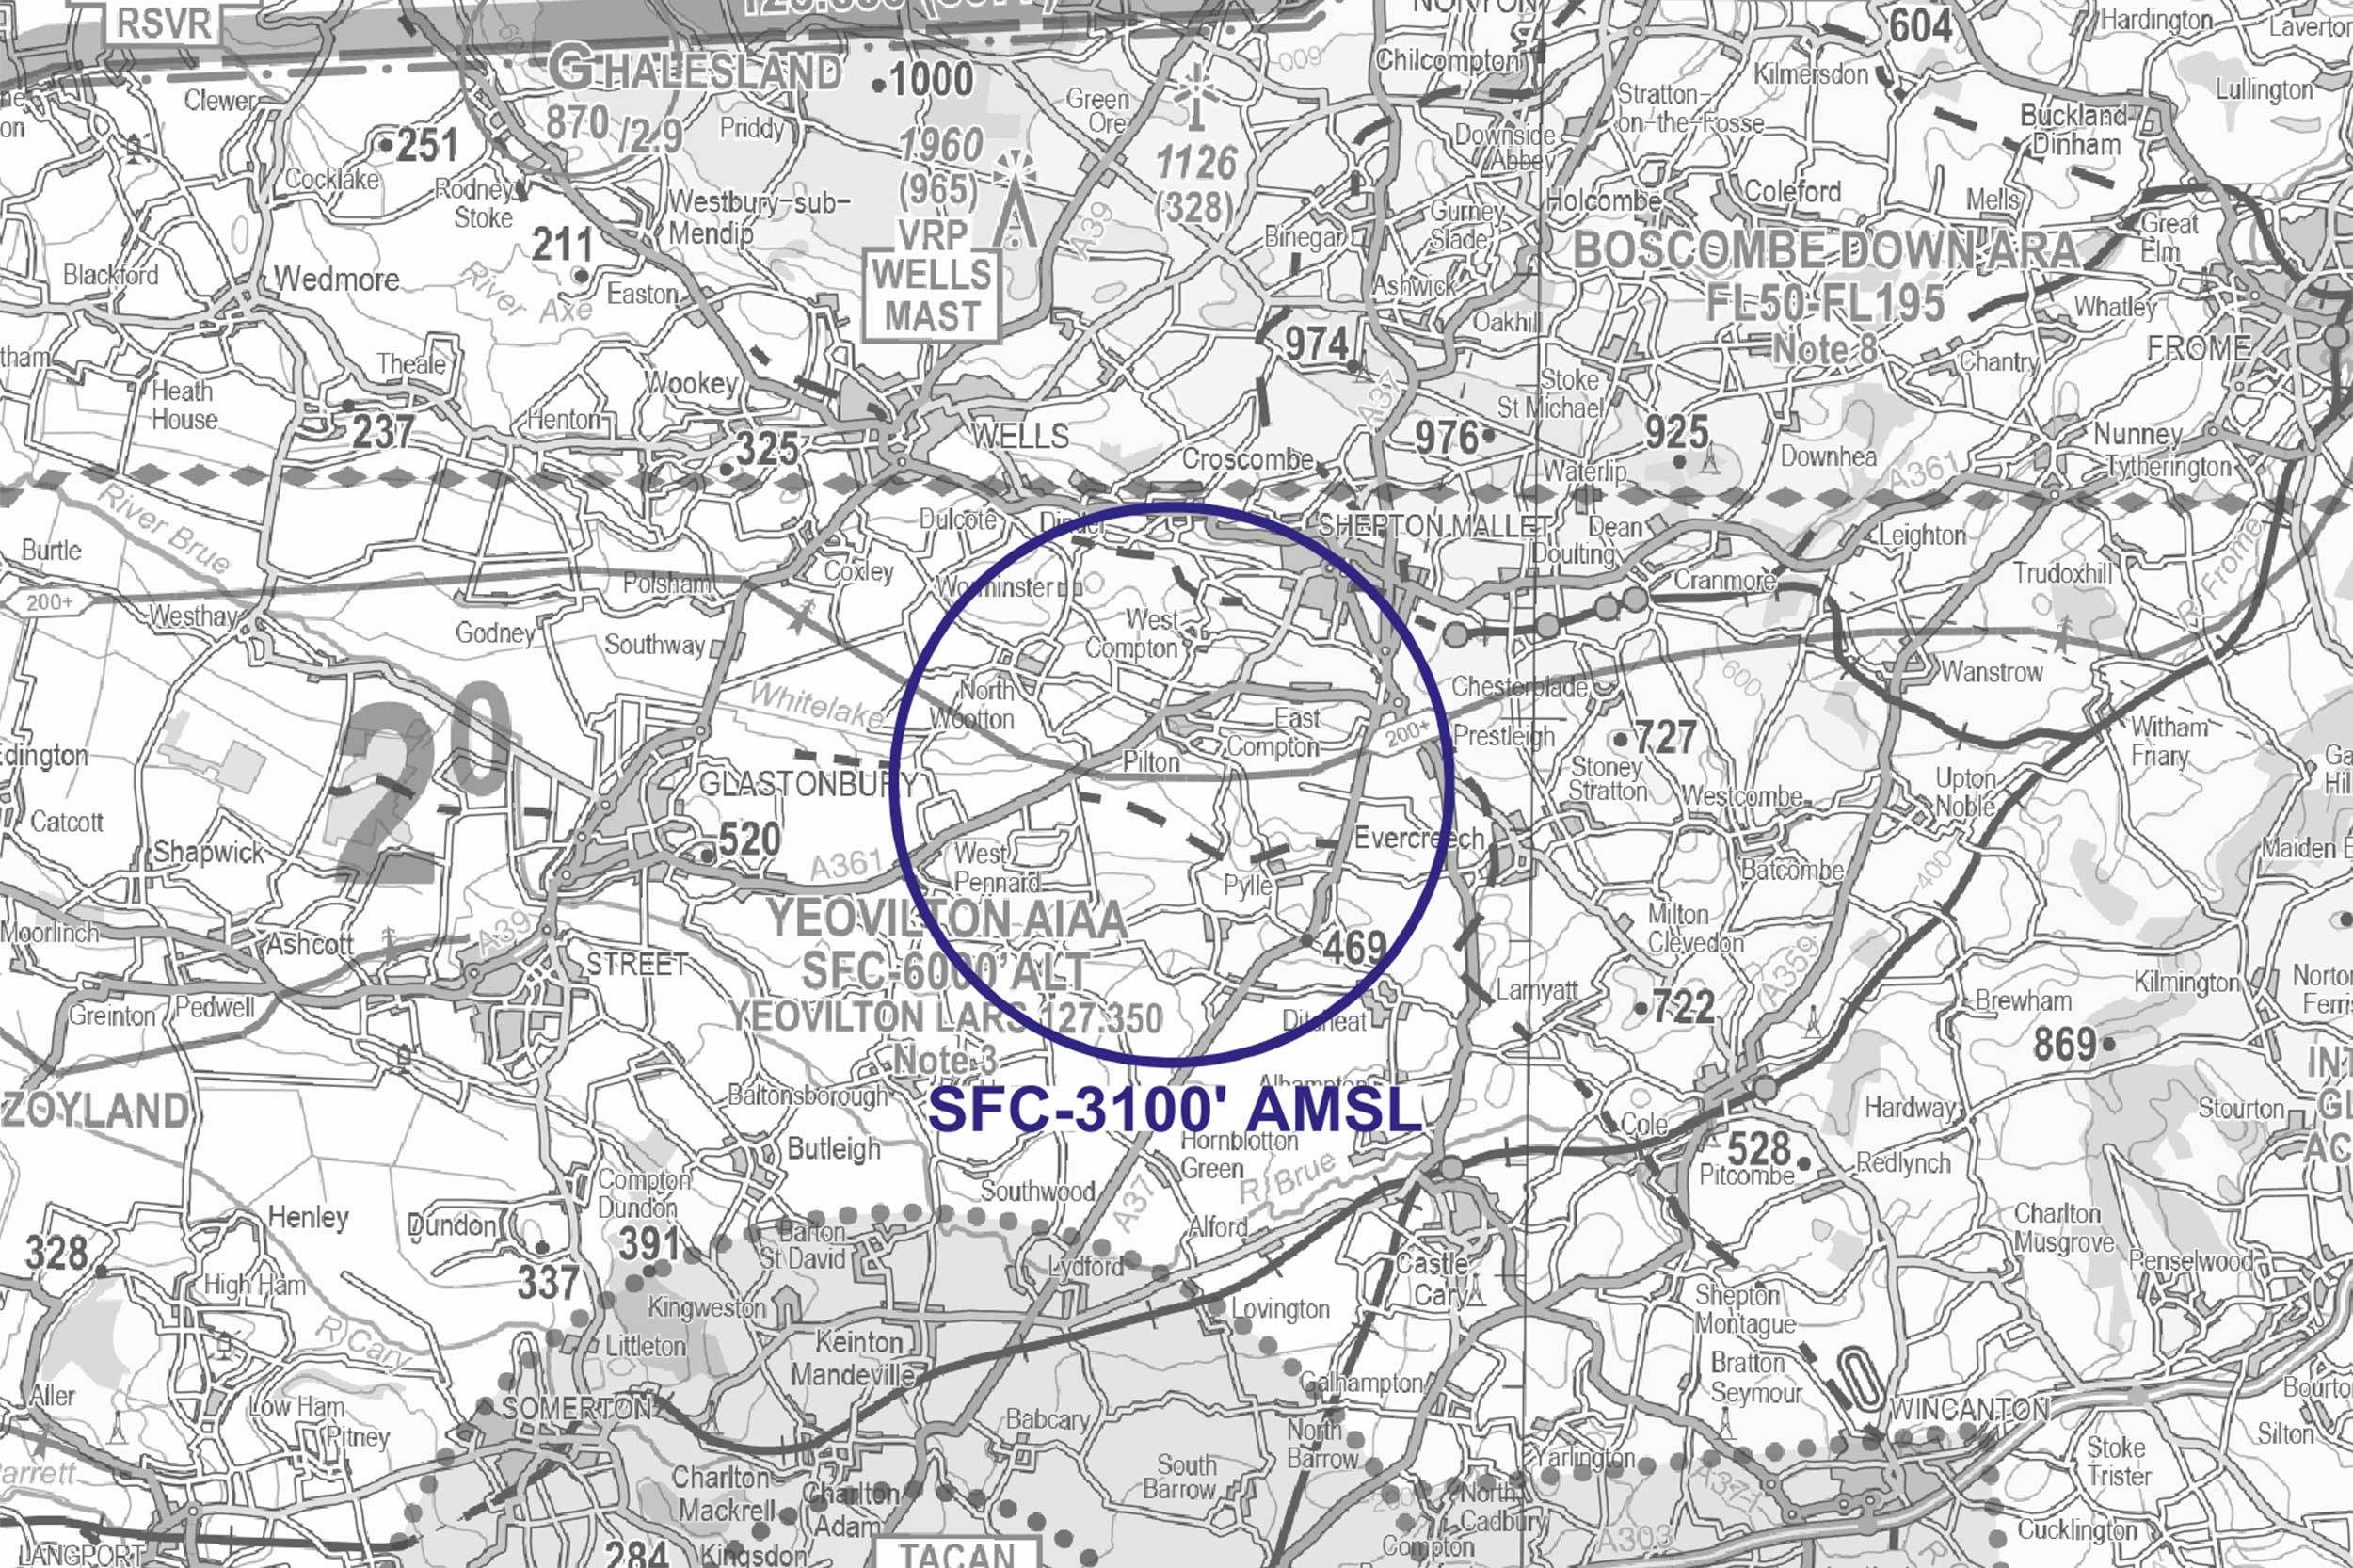 Don't fly over the Glastonbury site this weekend! There are airspace restrictions in place